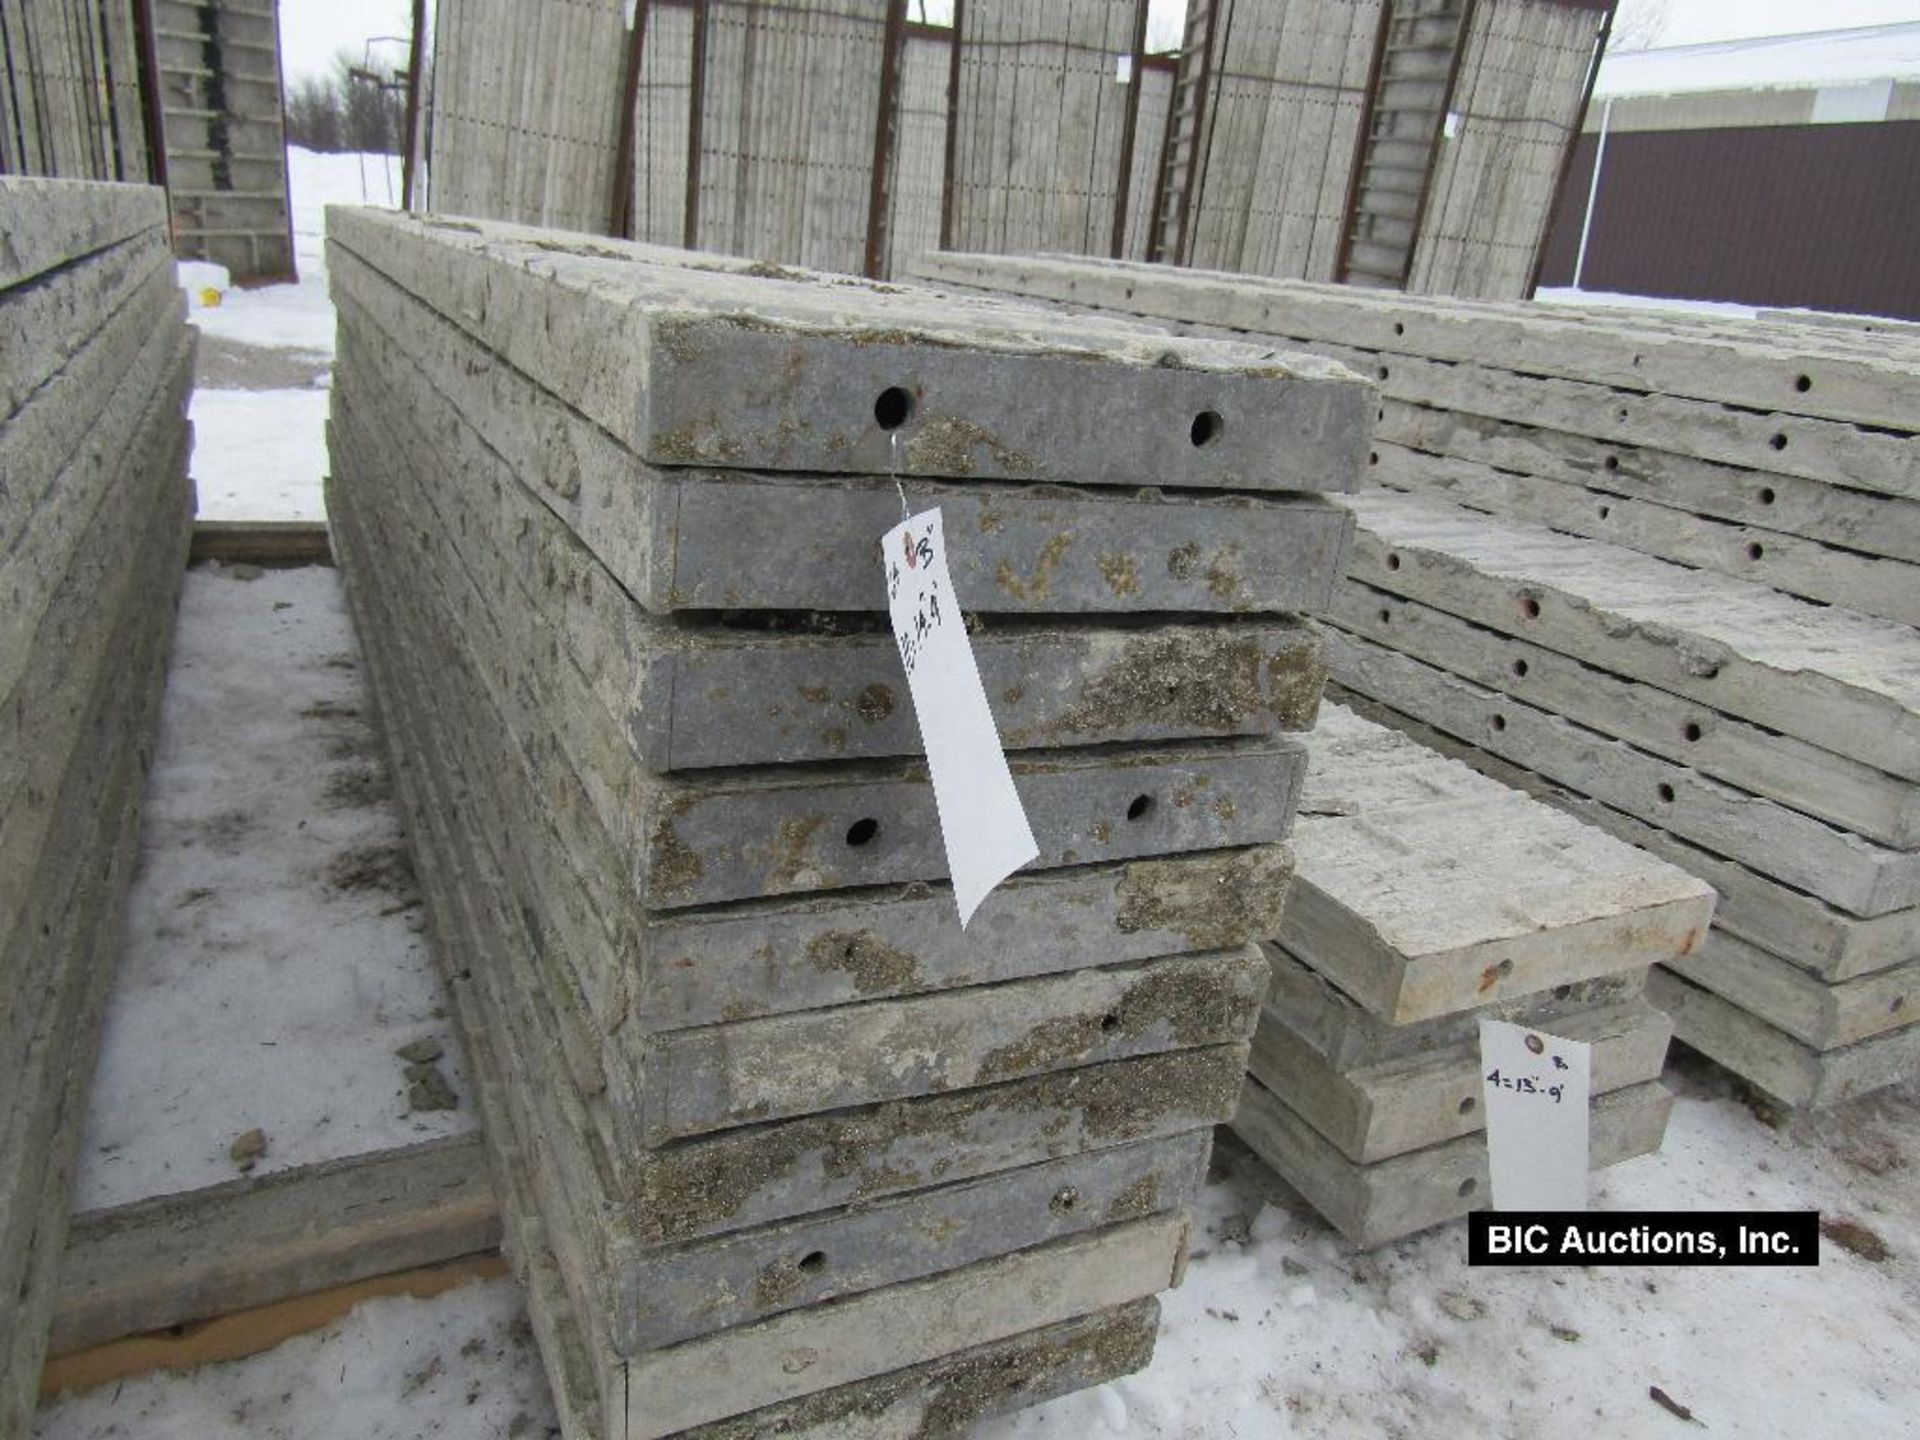 (10) 14" x 9' Durand Aluminum Concrete Forms, Textured Brick, 8" Hole Pattern, Located in Waldo, WI